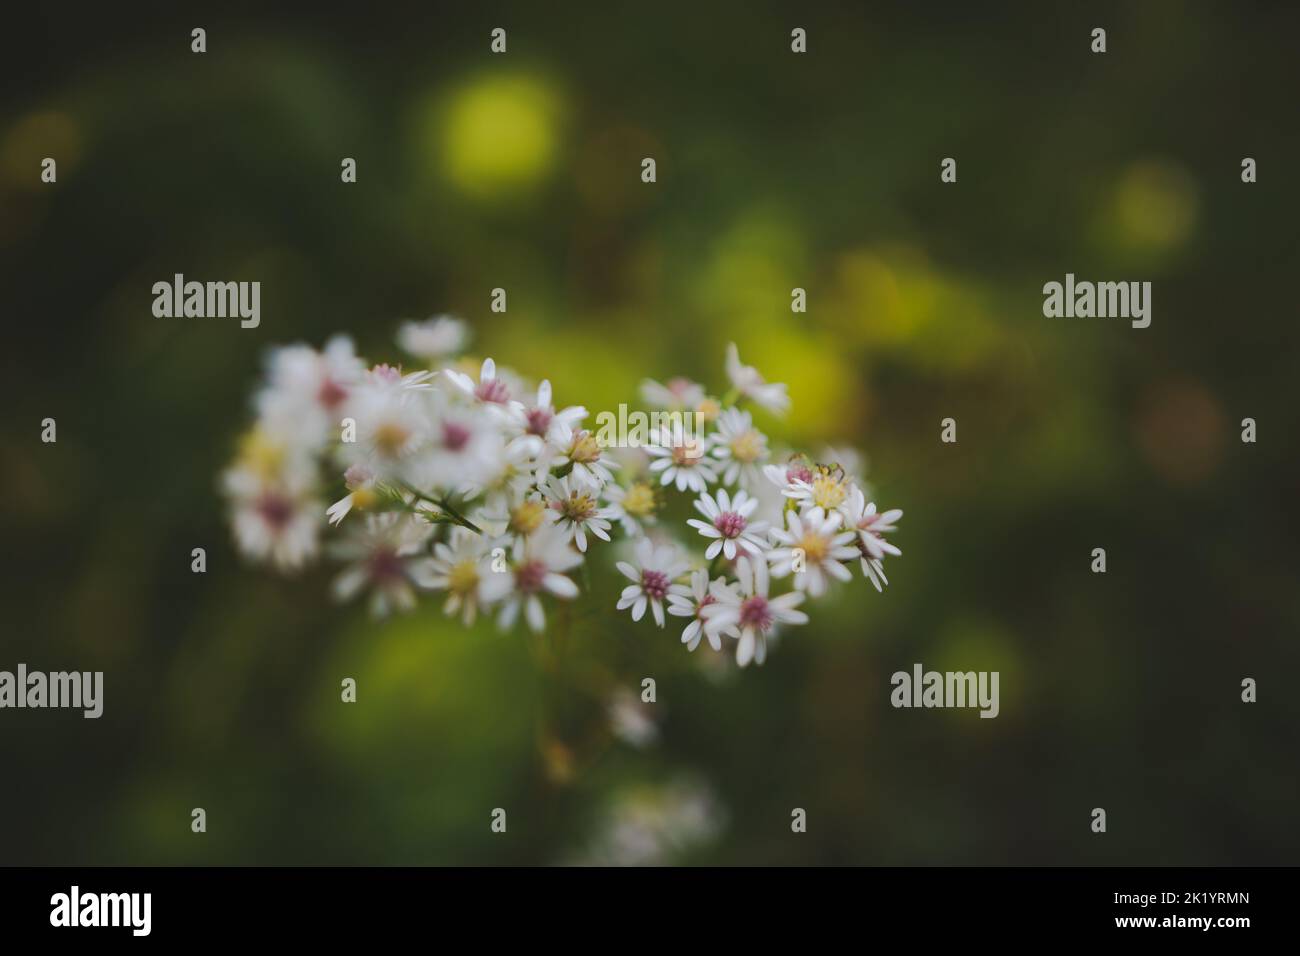 A selective focus of Calico asters with blurred background of bokeh lights Stock Photo